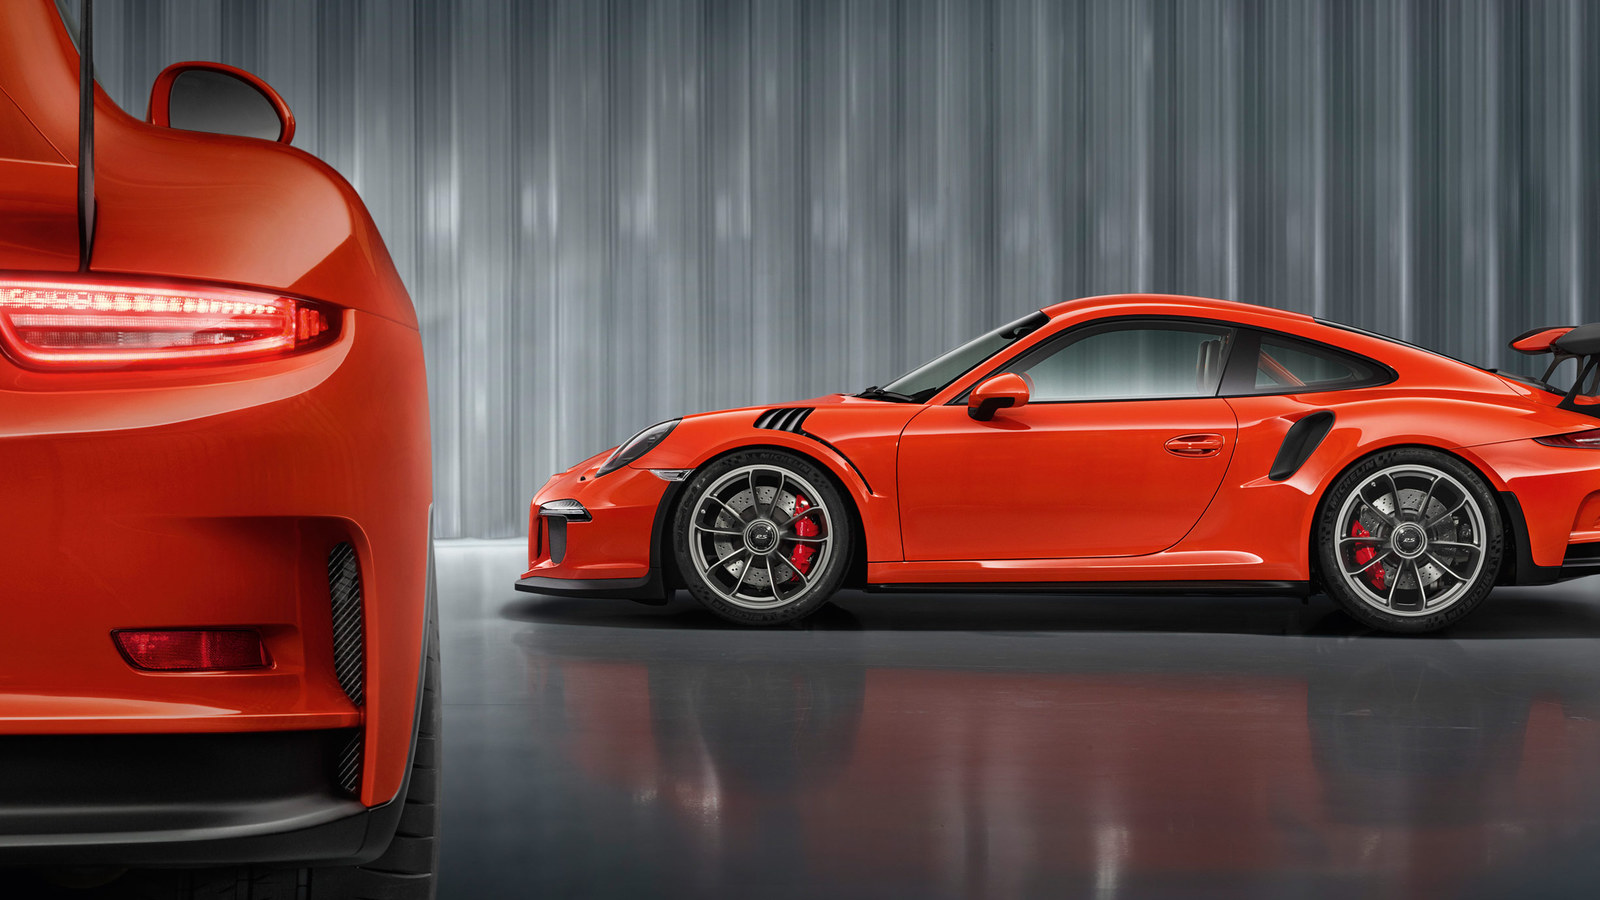 George Clooney Gets Gt3 Rs For His BirtHDay 6speedonline